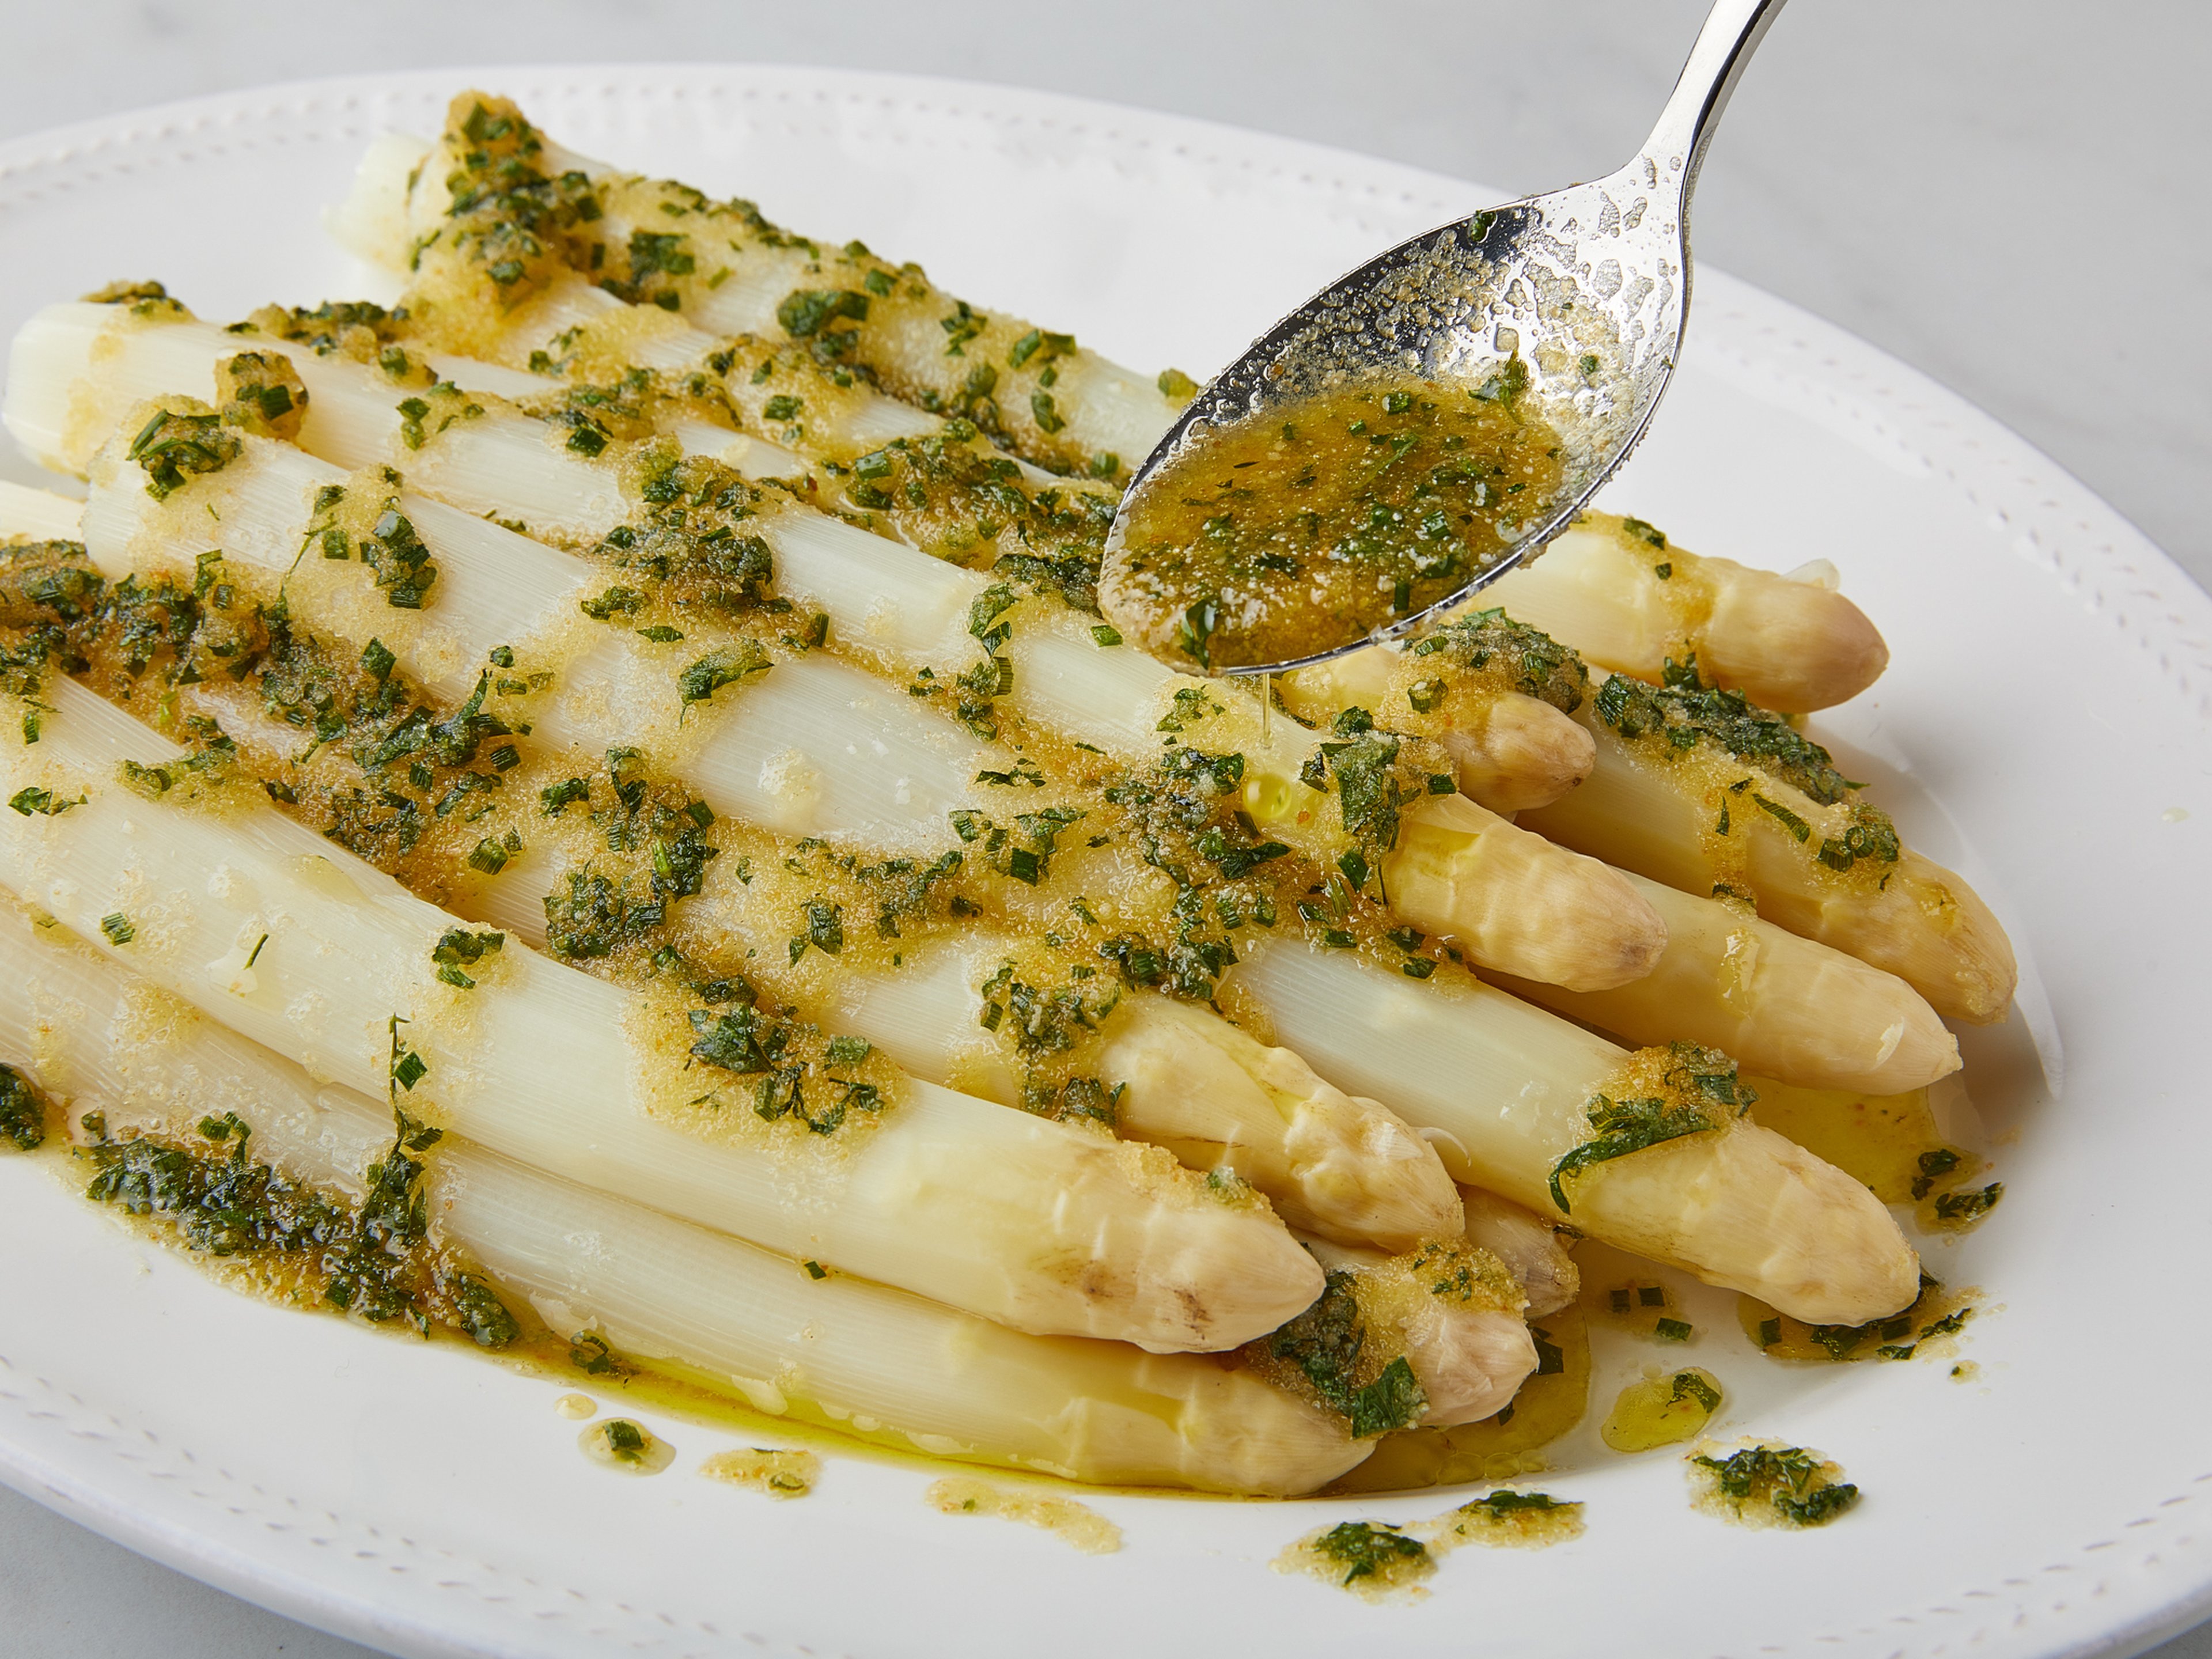 The Best Way to Cook White Asparagus? The German Way!